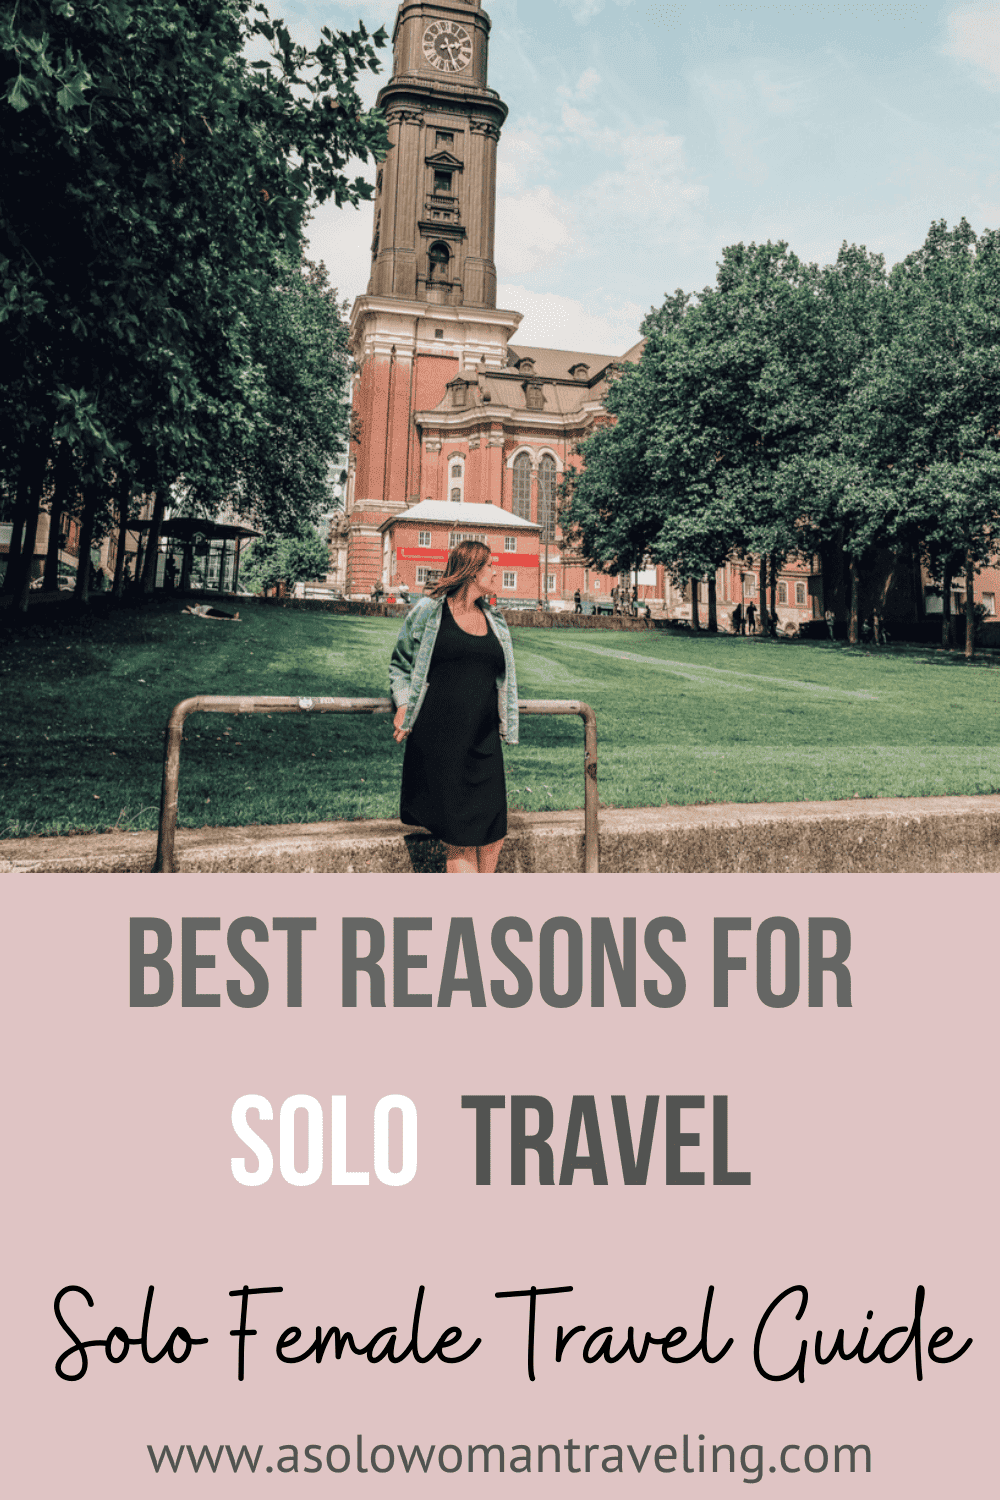 7 Reasons to Travel Solo Female